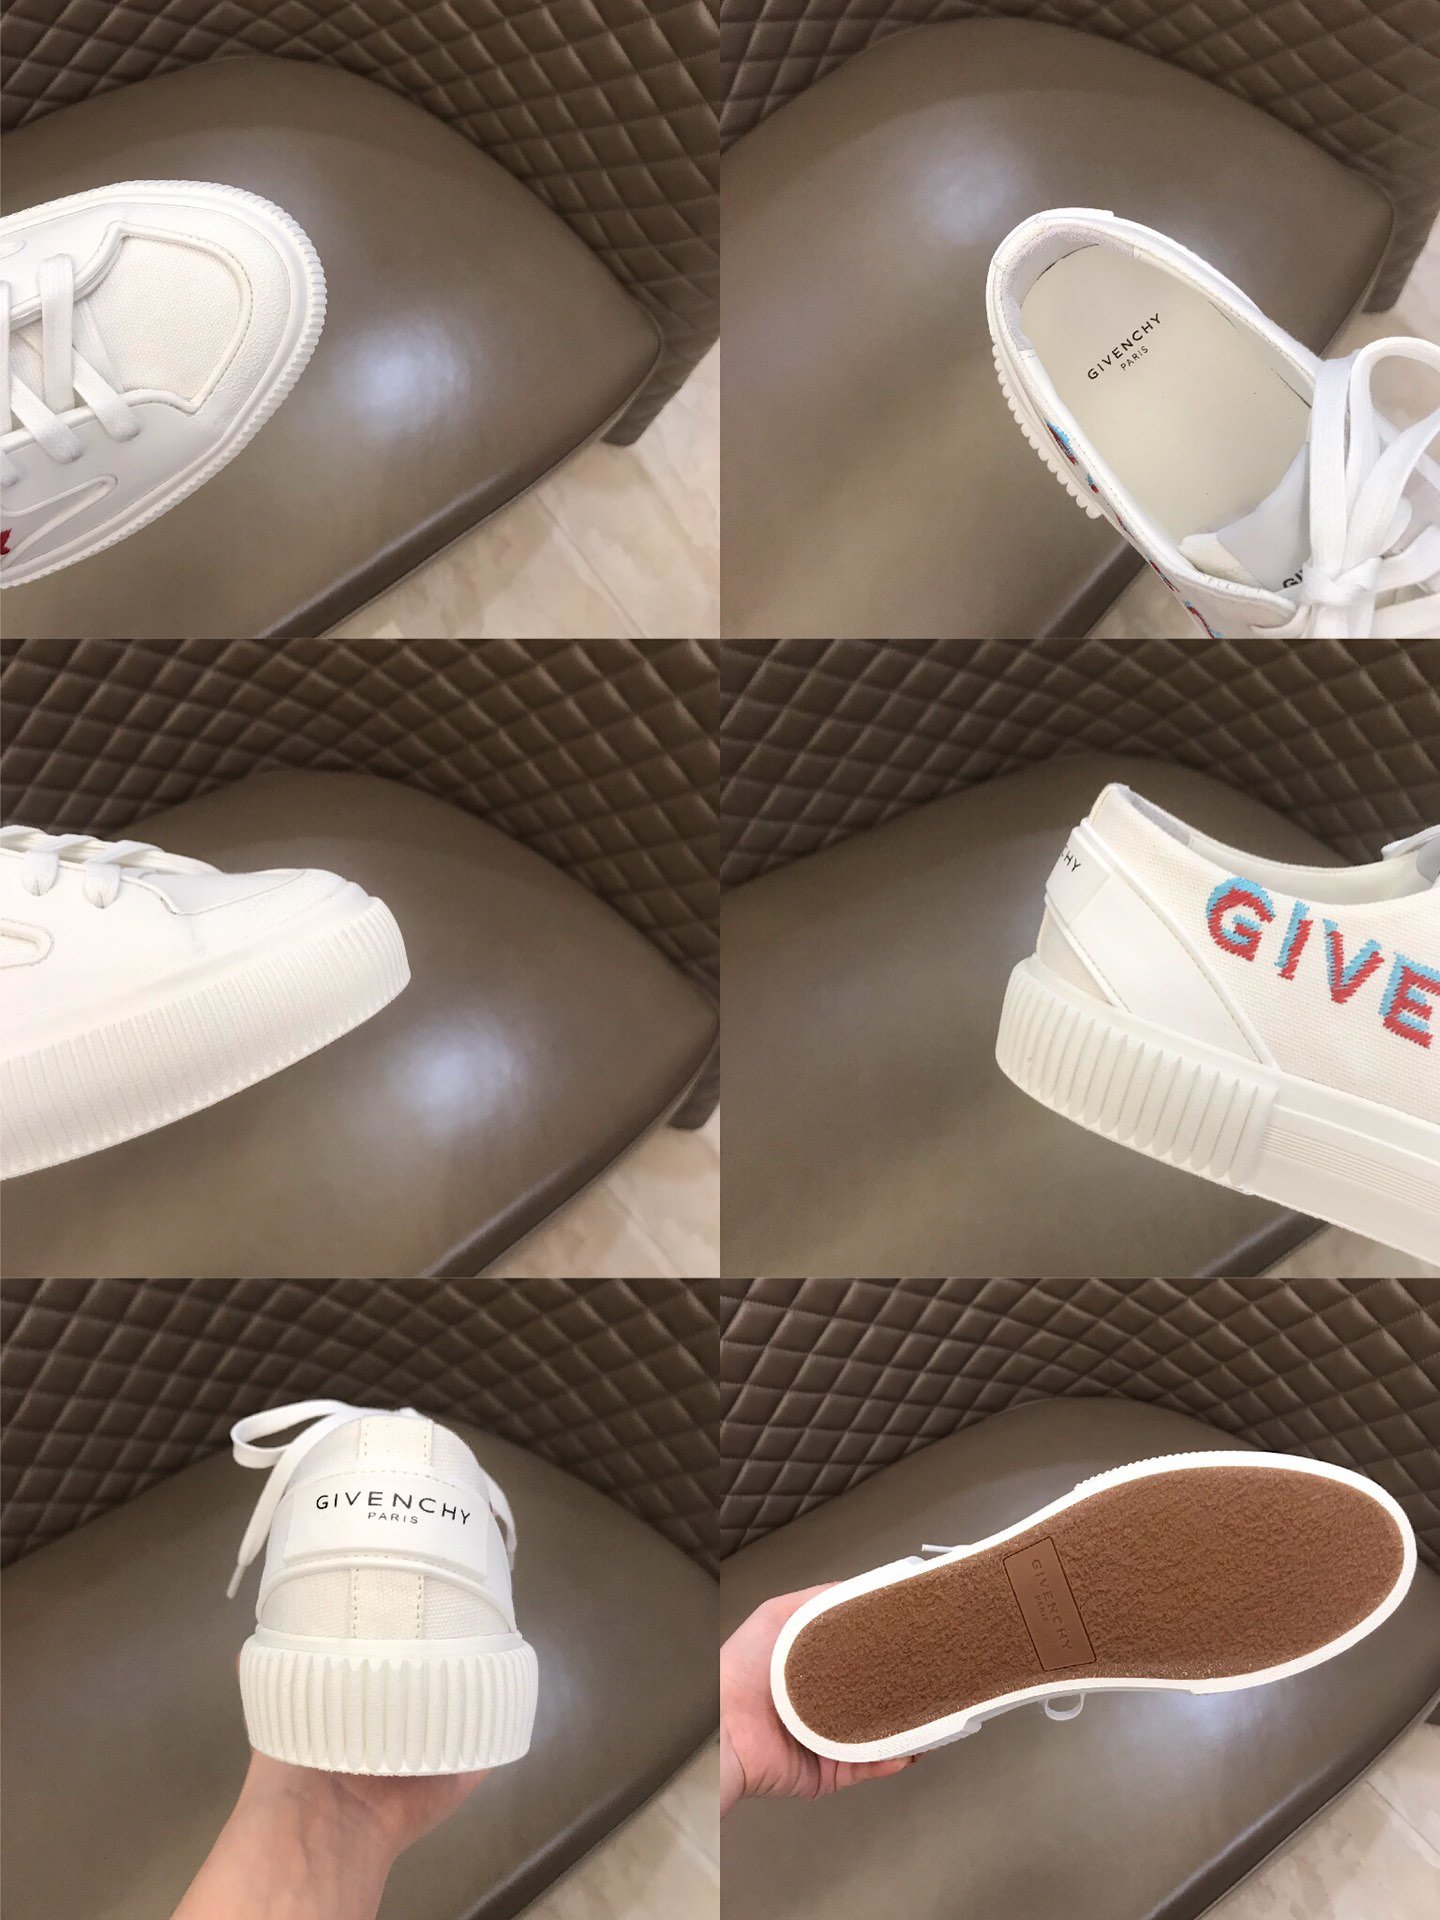 Givenchy High Quality Sneakers White and Fuchsia print MS021139